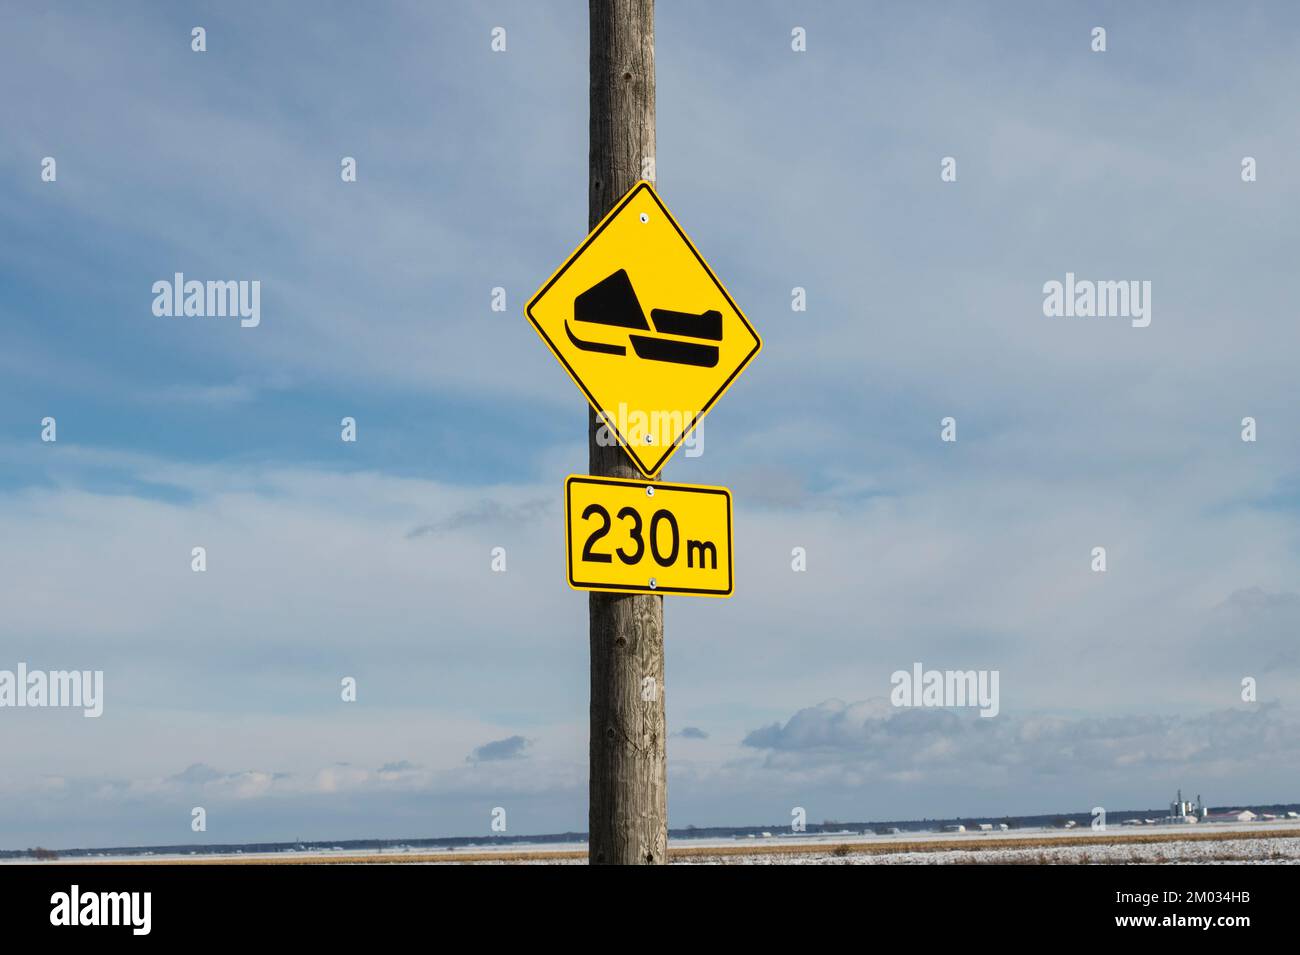 Snowmobiling sign in Saint-Guillaume, Quebec, Canada Stock Photo